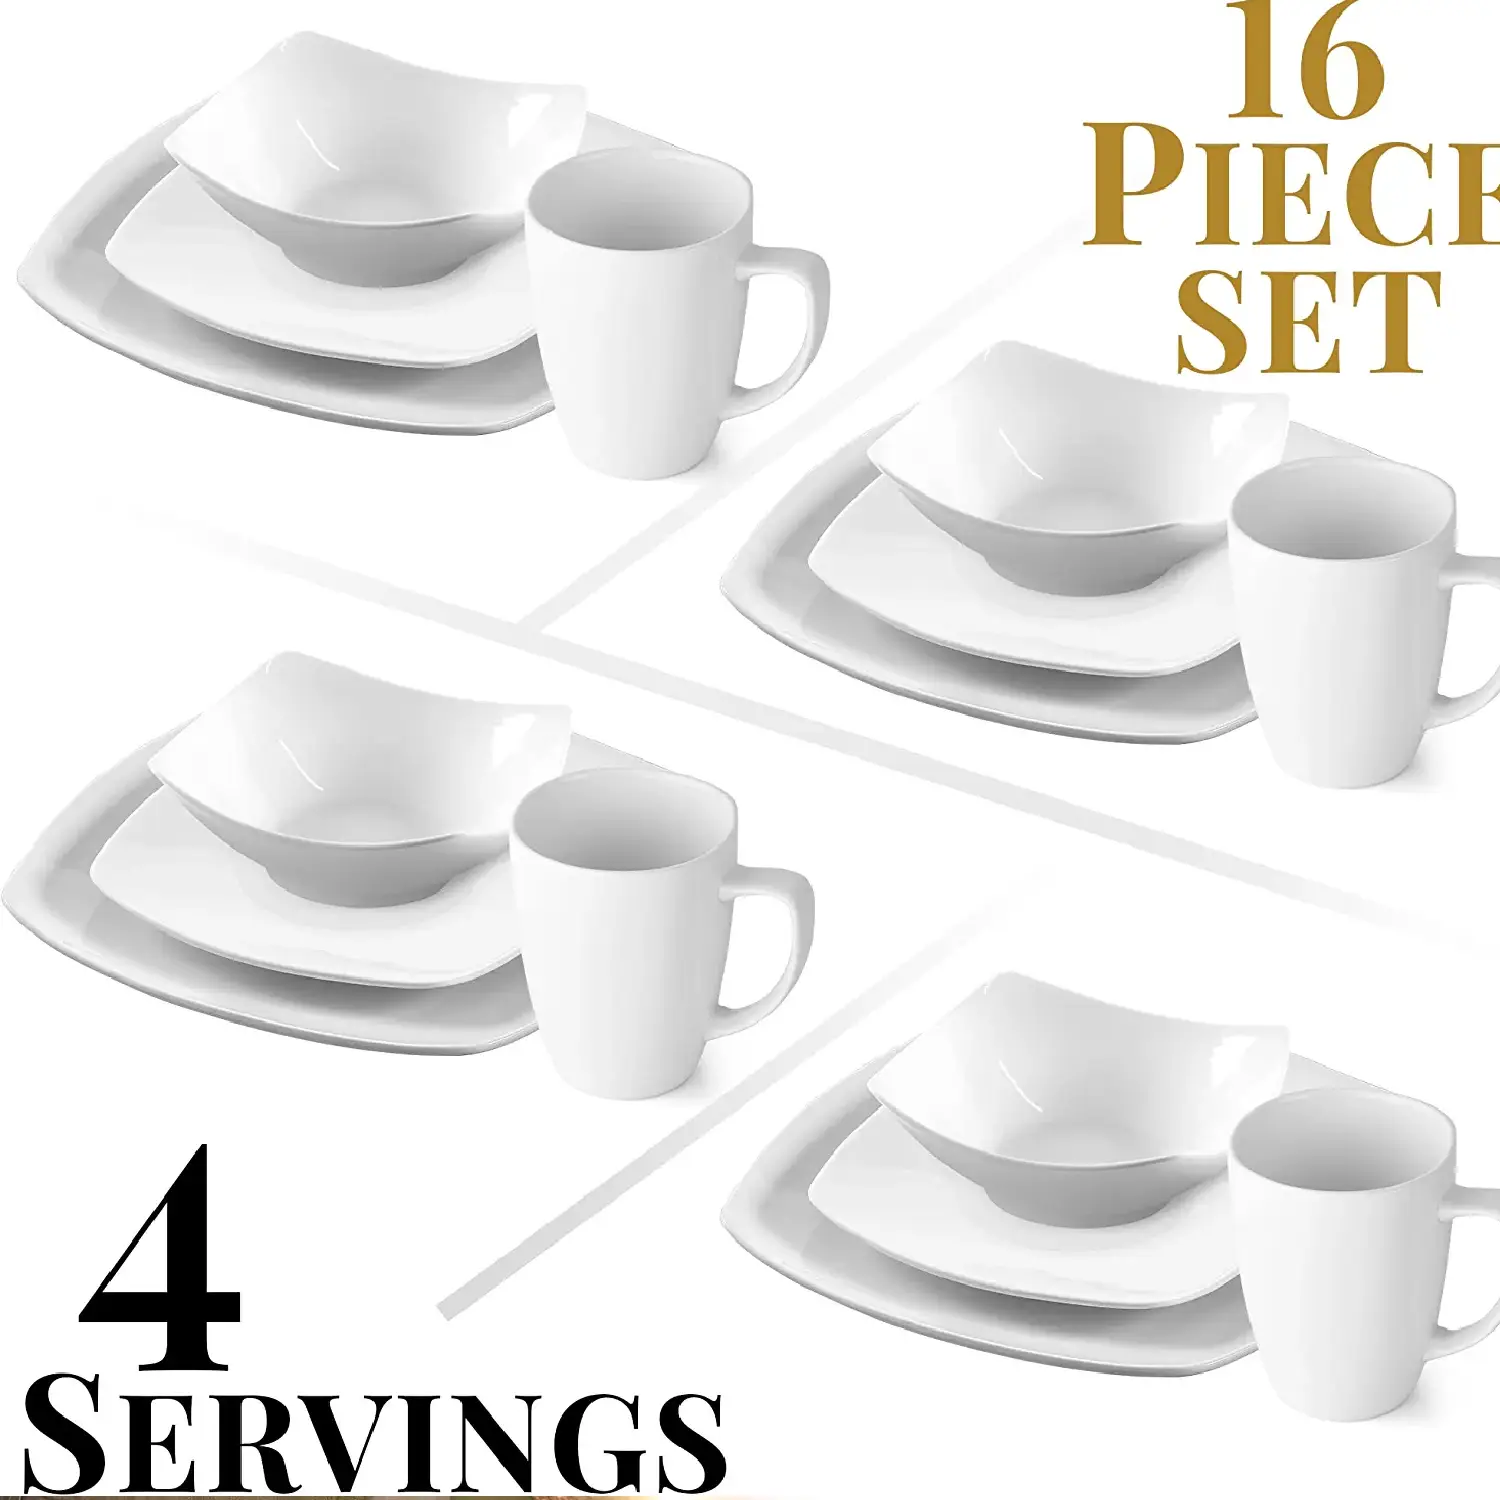 Zulay 16 Piece Dinnerware Sets - Porcelain White Plates and Bowls Sets - Premium Dish Set